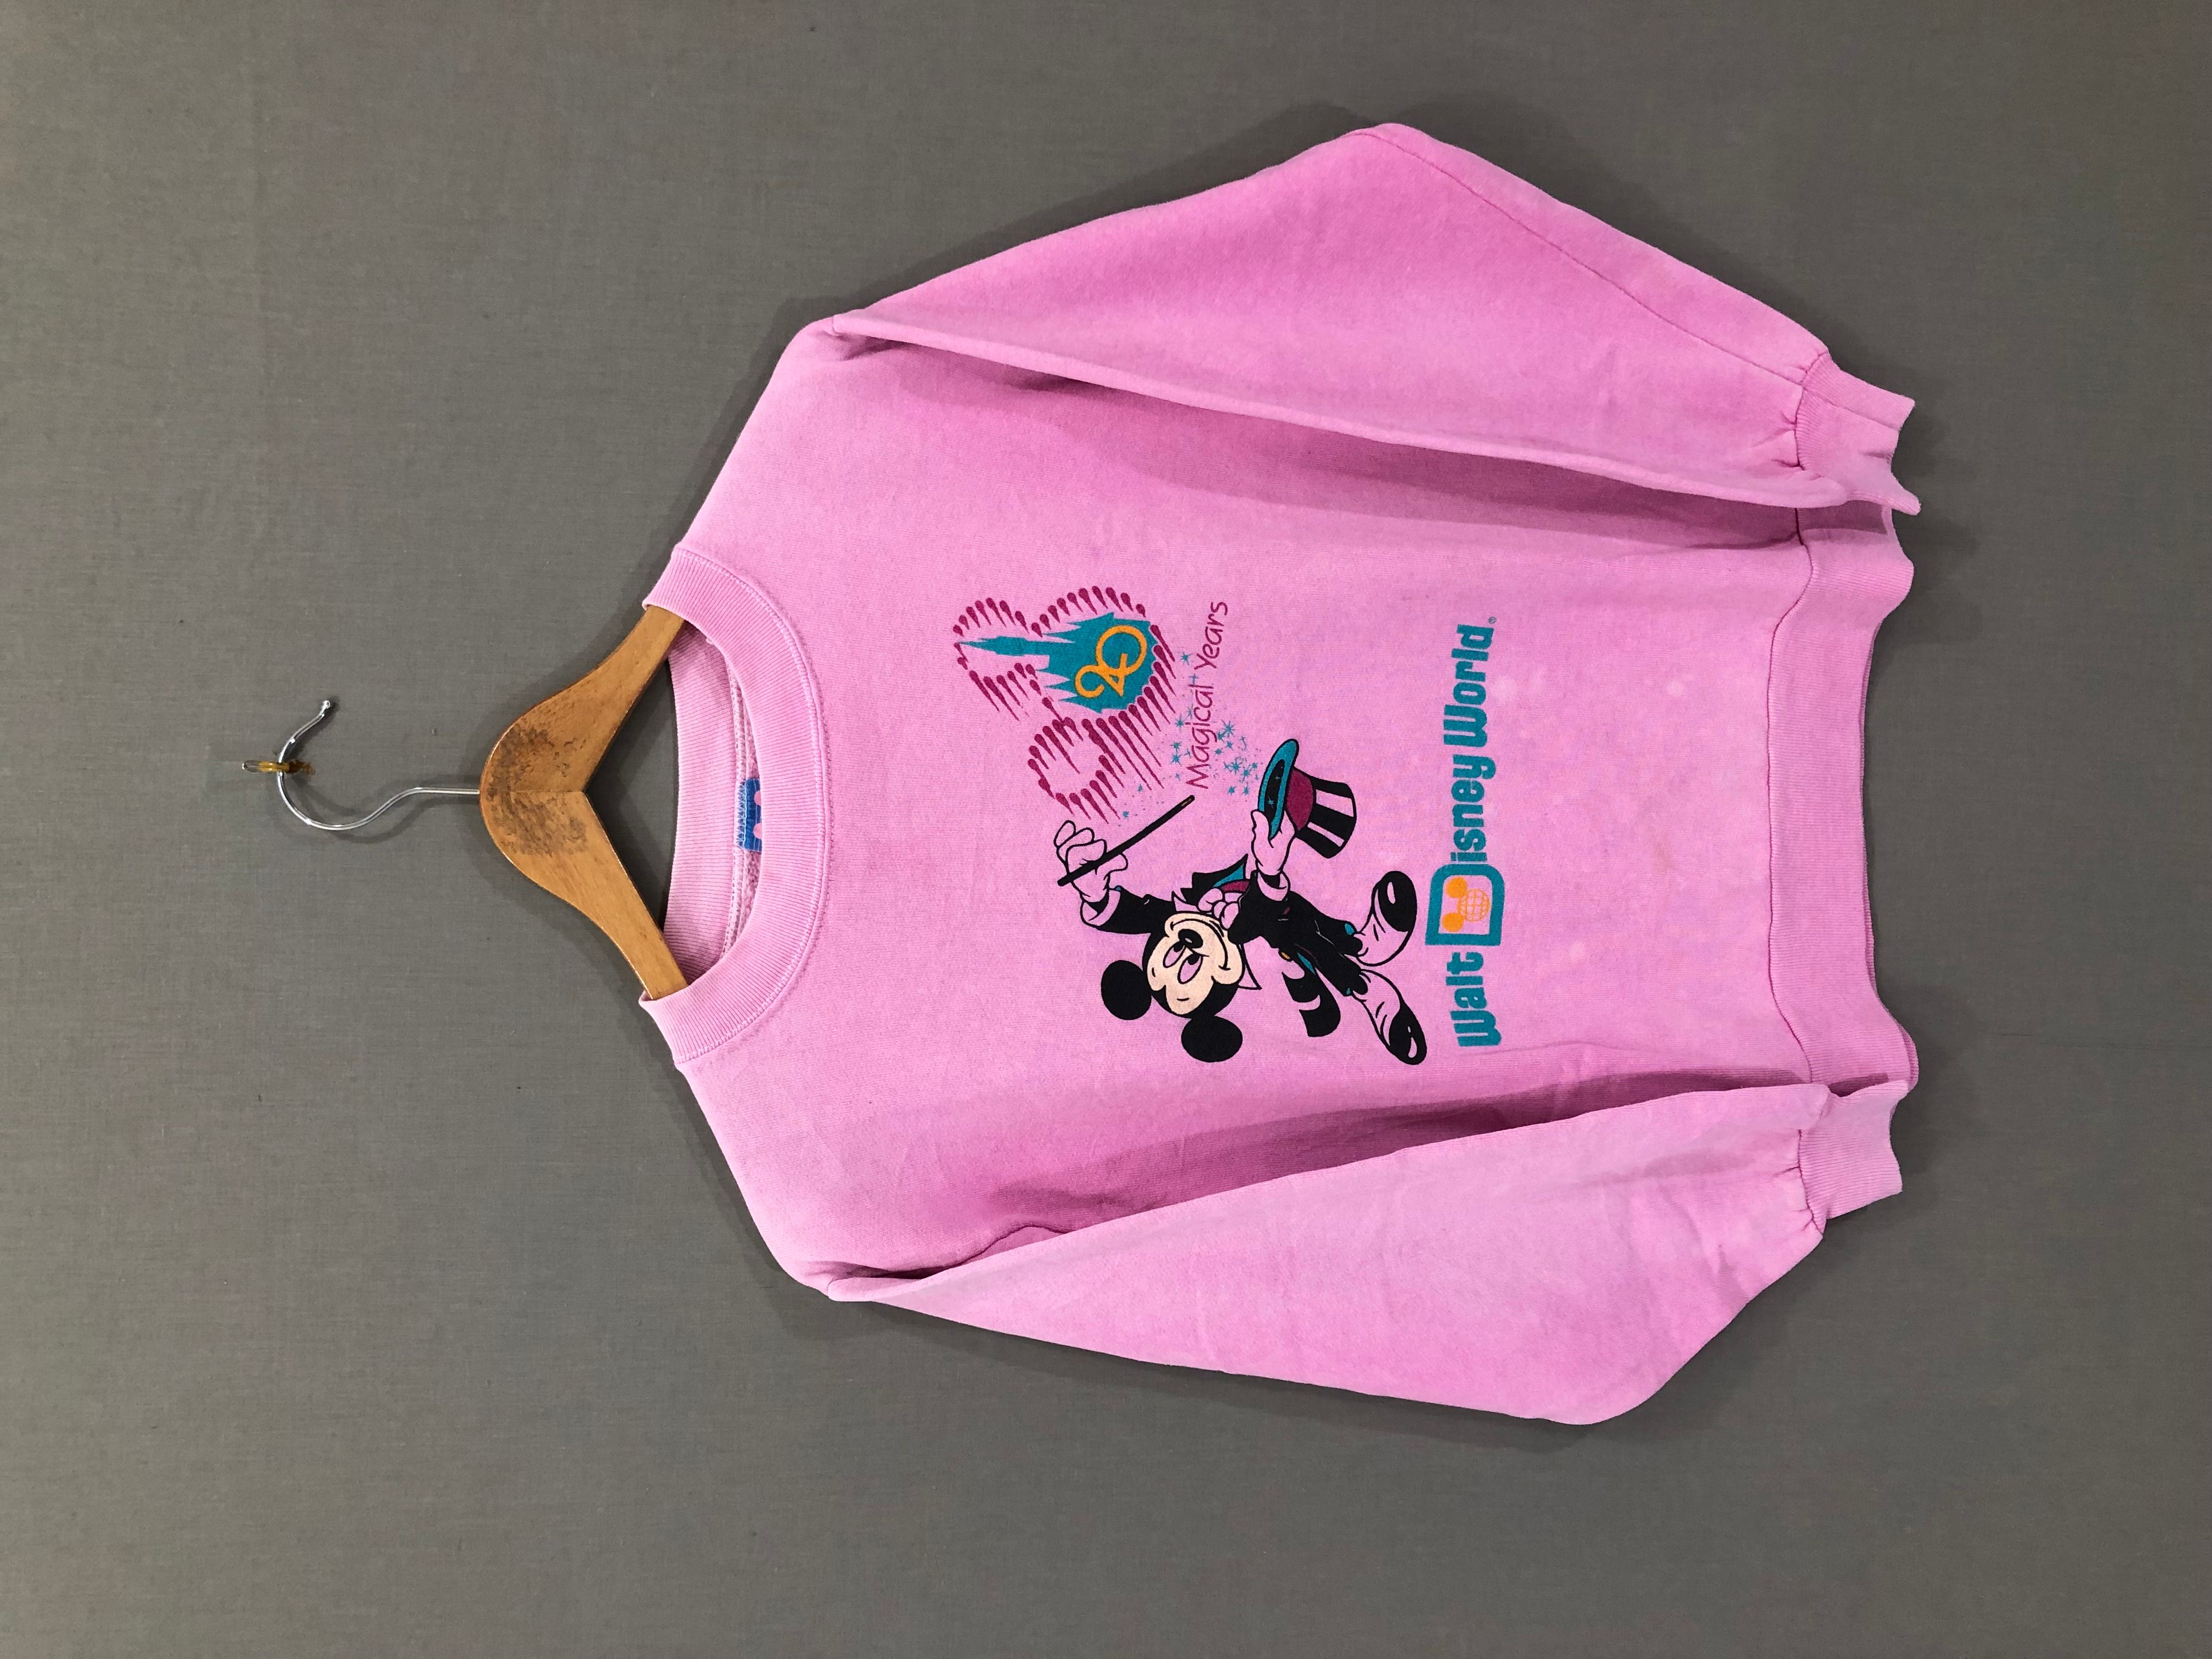 Mickey Mouse Vintage Pink Mickey Mouse Sweatshirt XS #5600-1-212-IRA Size US XS / EU 42 / 0 - 1 Preview